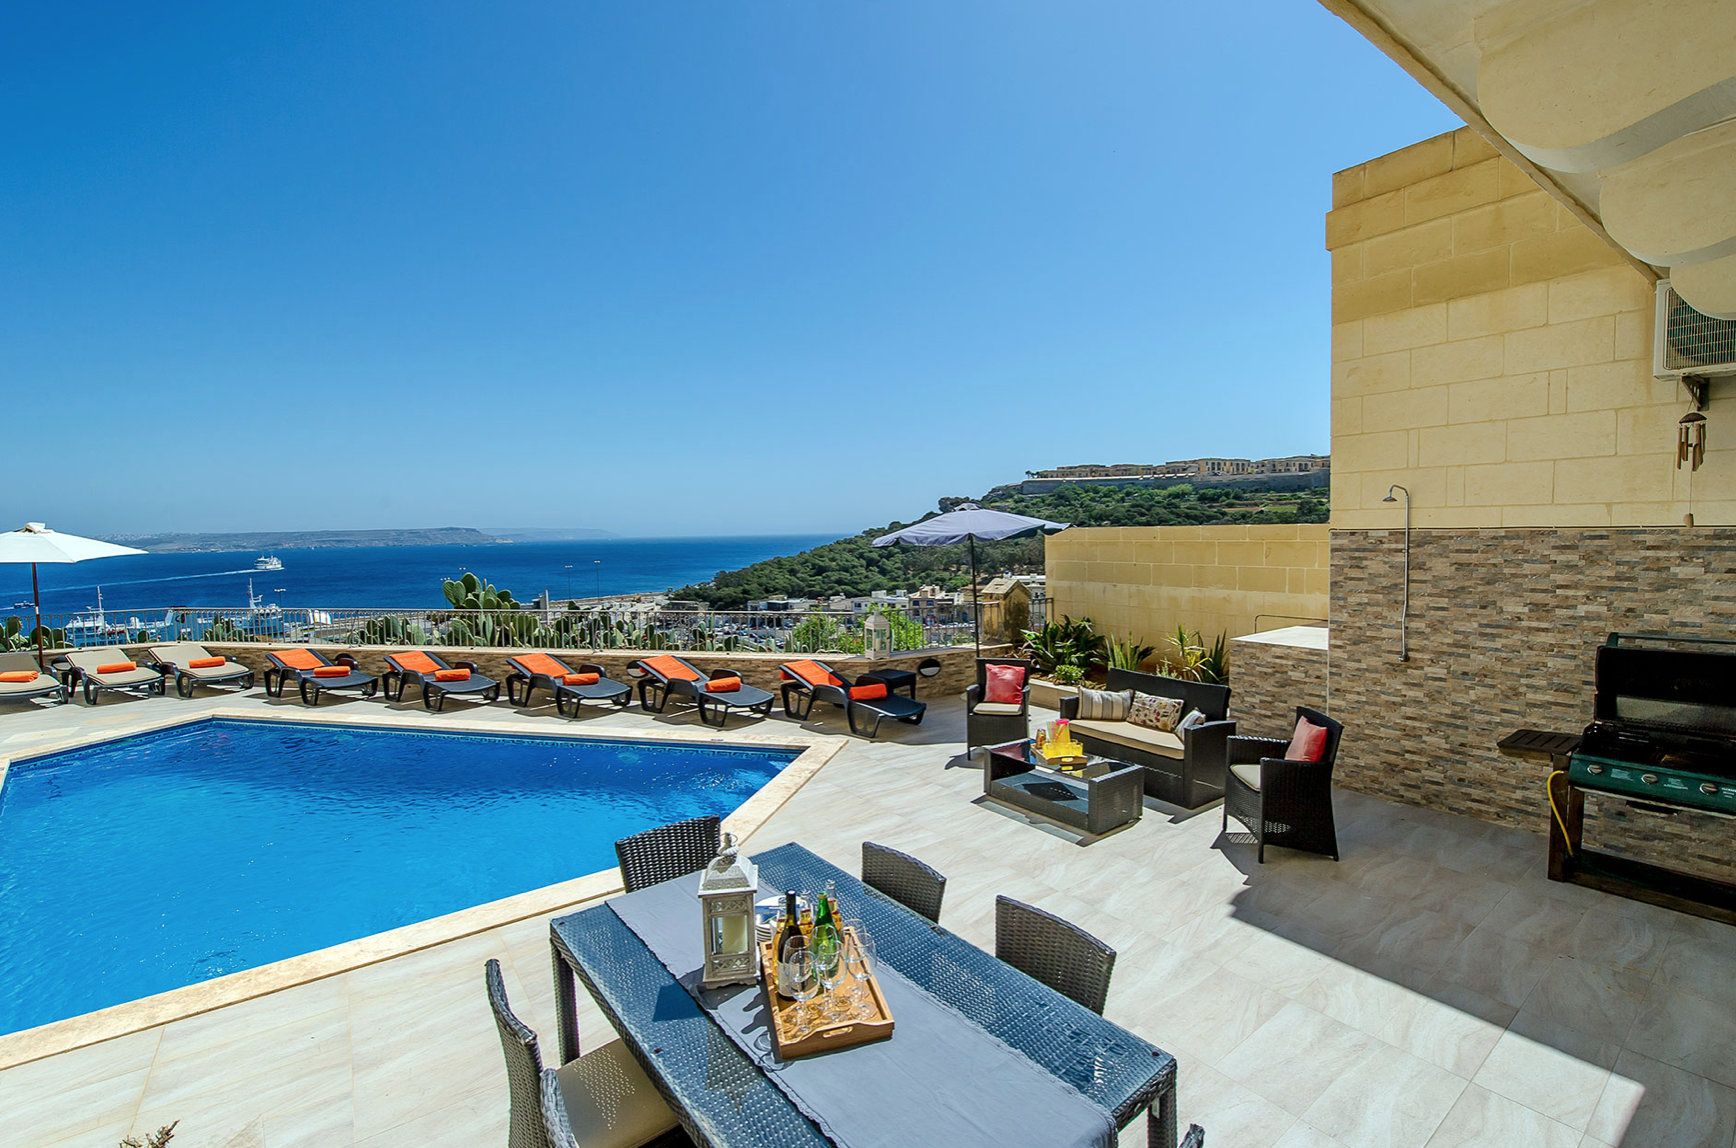 Gozo Holiday Home - Five reasons to have a Gozo holiday this summer